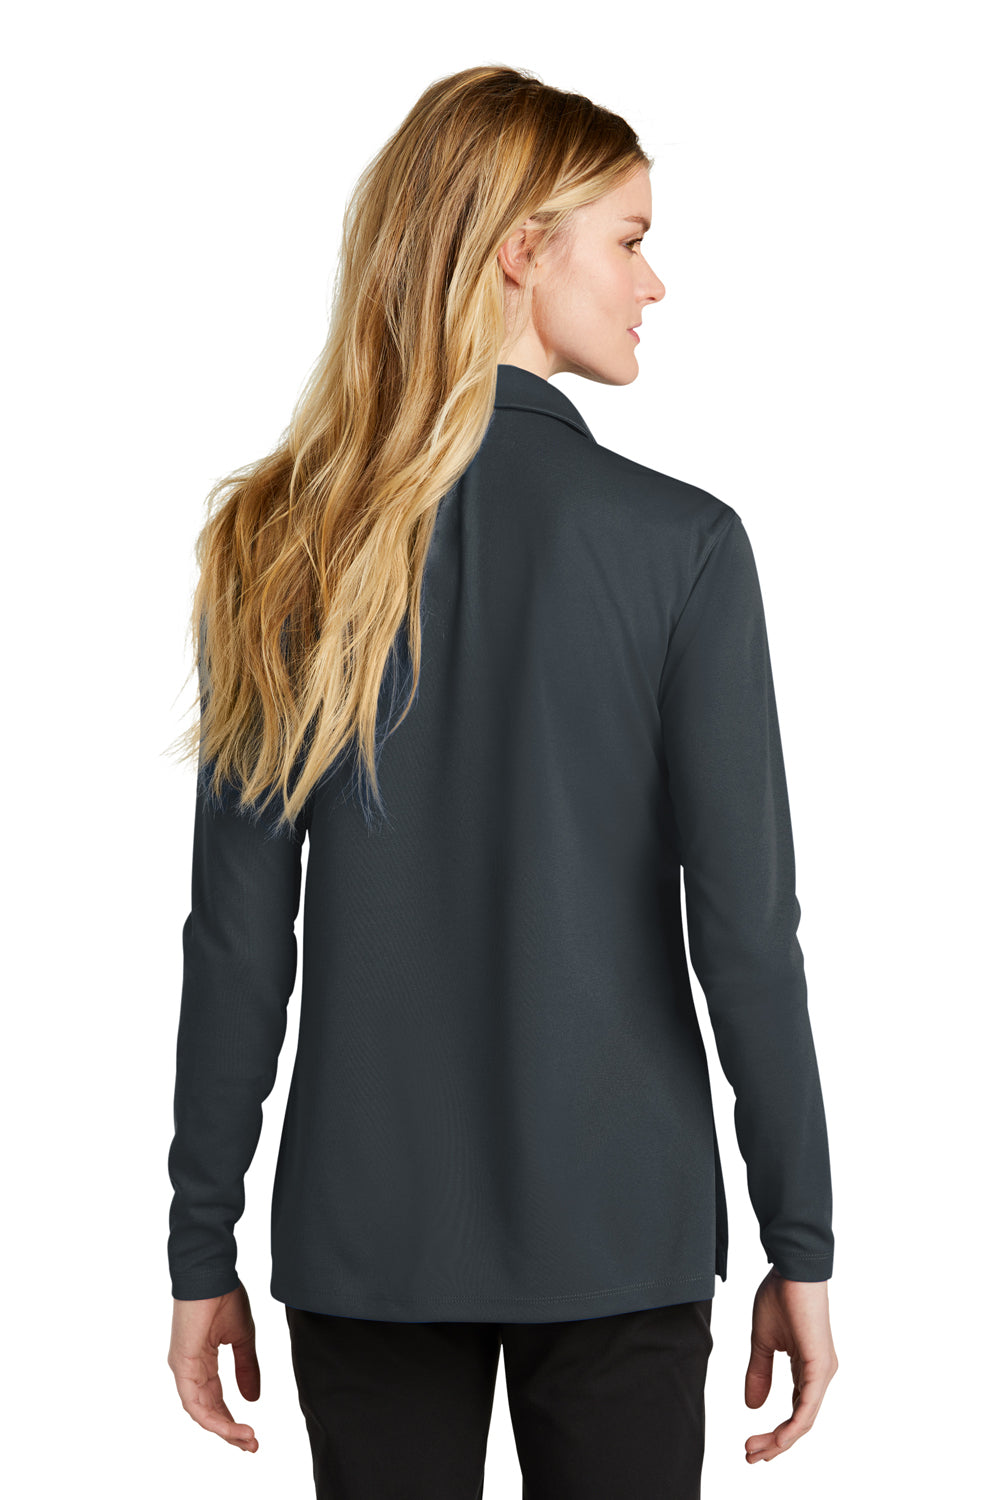 Nike NKDC2105 Womens Dri-Fit Moisture Wicking Micro Pique 2.0 Long Sleeve Polo Shirt Anthracite Grey Model Back